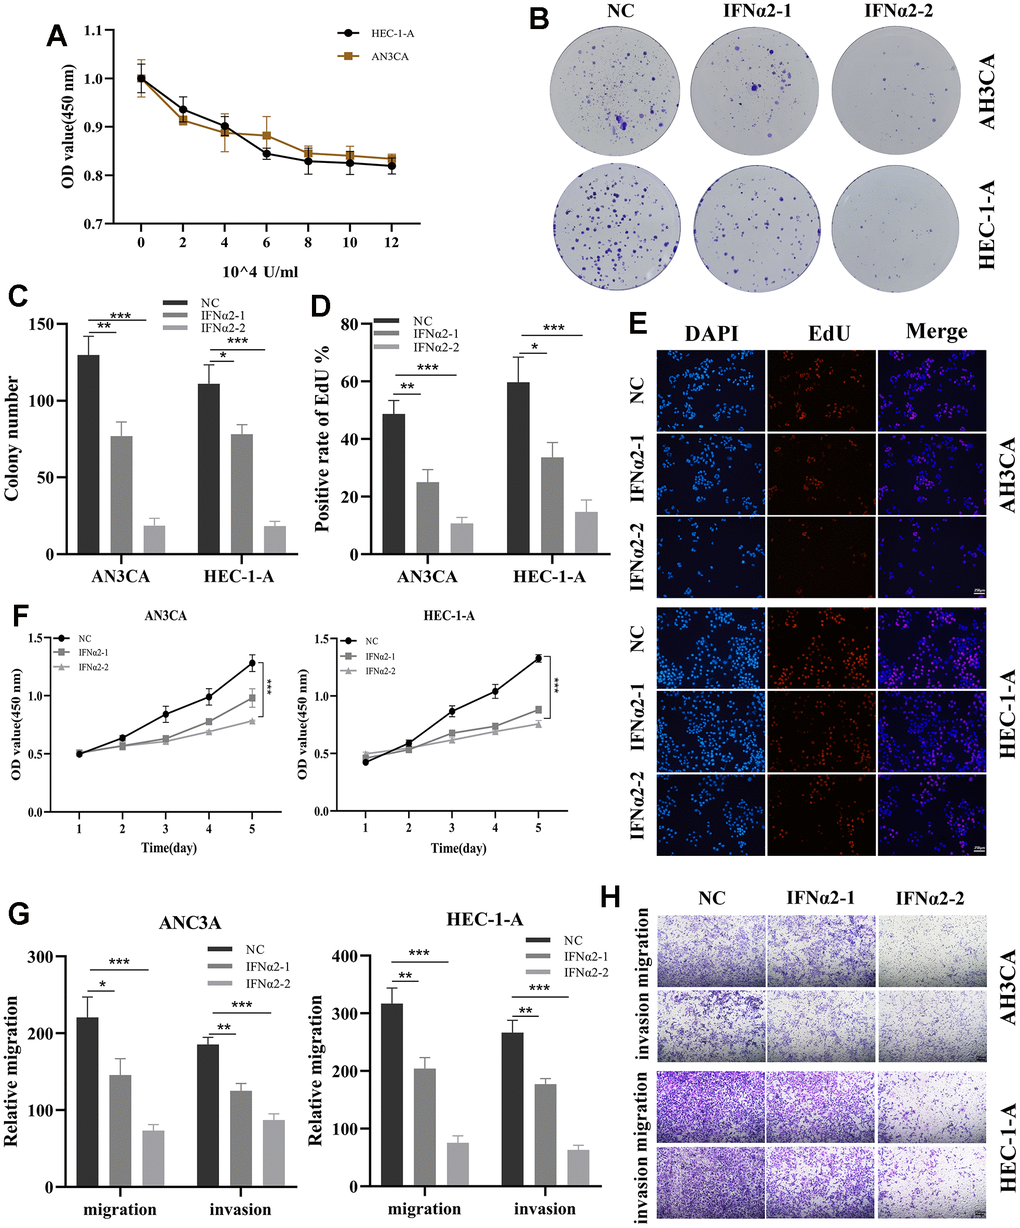 Validation of the role of IFNA2 in vitro experiments. (A) A CCK-8 assay was used to detect the effect of IFNα2 on the proliferation of HEC-1-A and AN3CA cells; (B, C) After treated with IFNα2 (IFNα2-1 (2×104U/mL) and IFNα2-2 (8×104U/mL)), the cloning ability of HEC-1-A and AN3CA cell lines decreased significantly; (D, E) EdU staining showing the effect of IFNα2 on HEC-1-A and AN3CA cells; (F) CCK-8 assay. After treated with IFNα2, the activity of HEC-1-A and AN3CA cell lines decreased significantly; (G, H) Transwell assay. After treated with IFNα2, the migration and invasion abilities of HEC-1-A and AN3CA cell lines were significantly decreased. *P